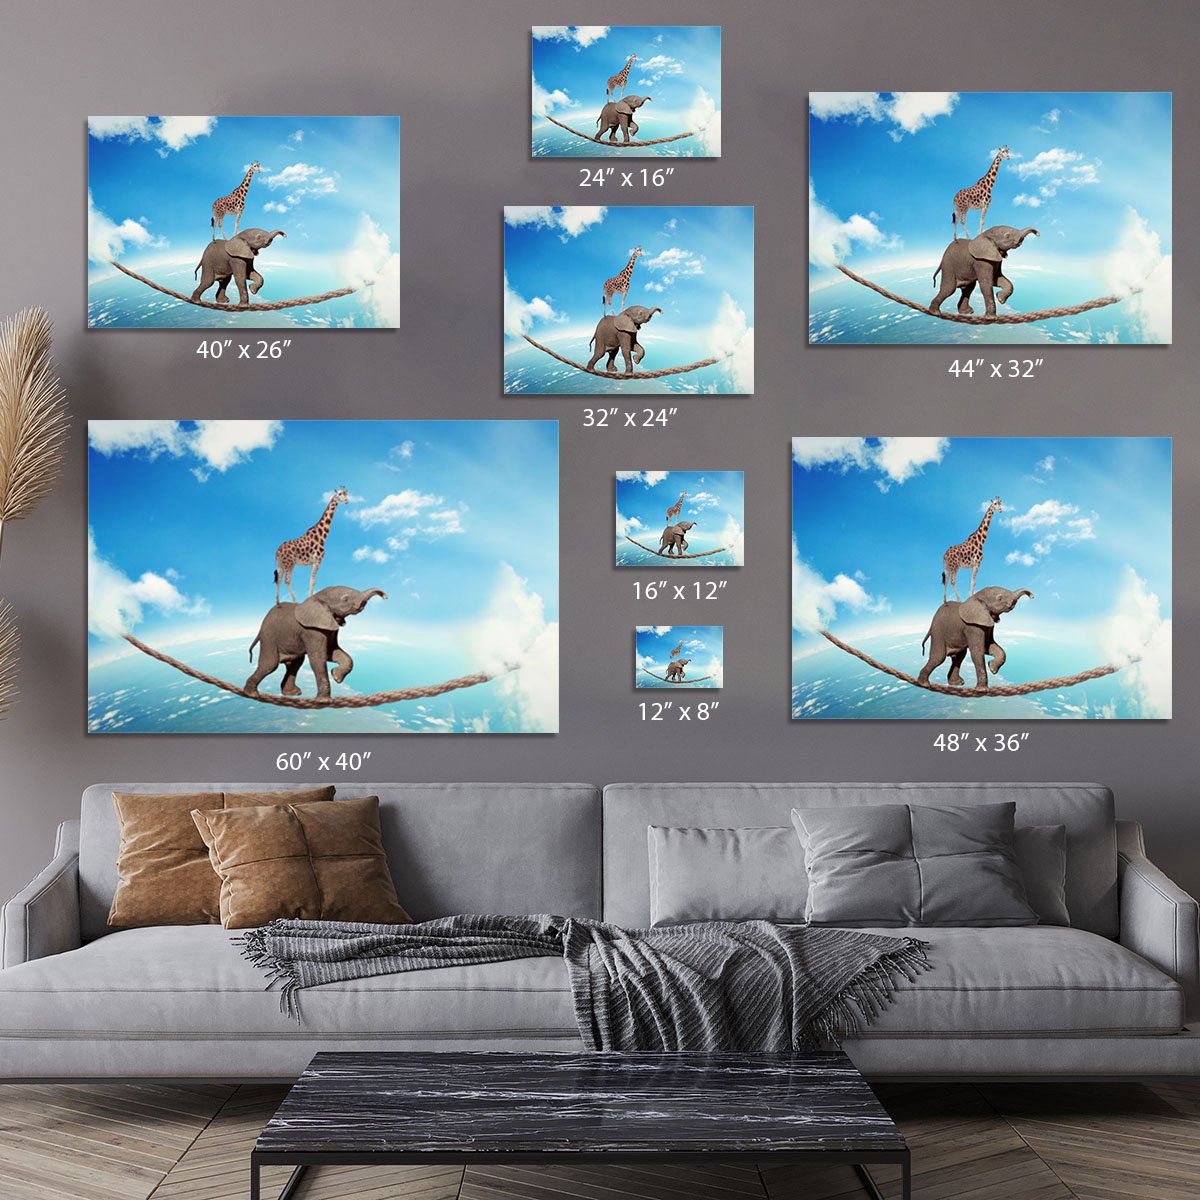 Elephant with giraffe walking on dangerous rope high in sky Canvas Print or Poster